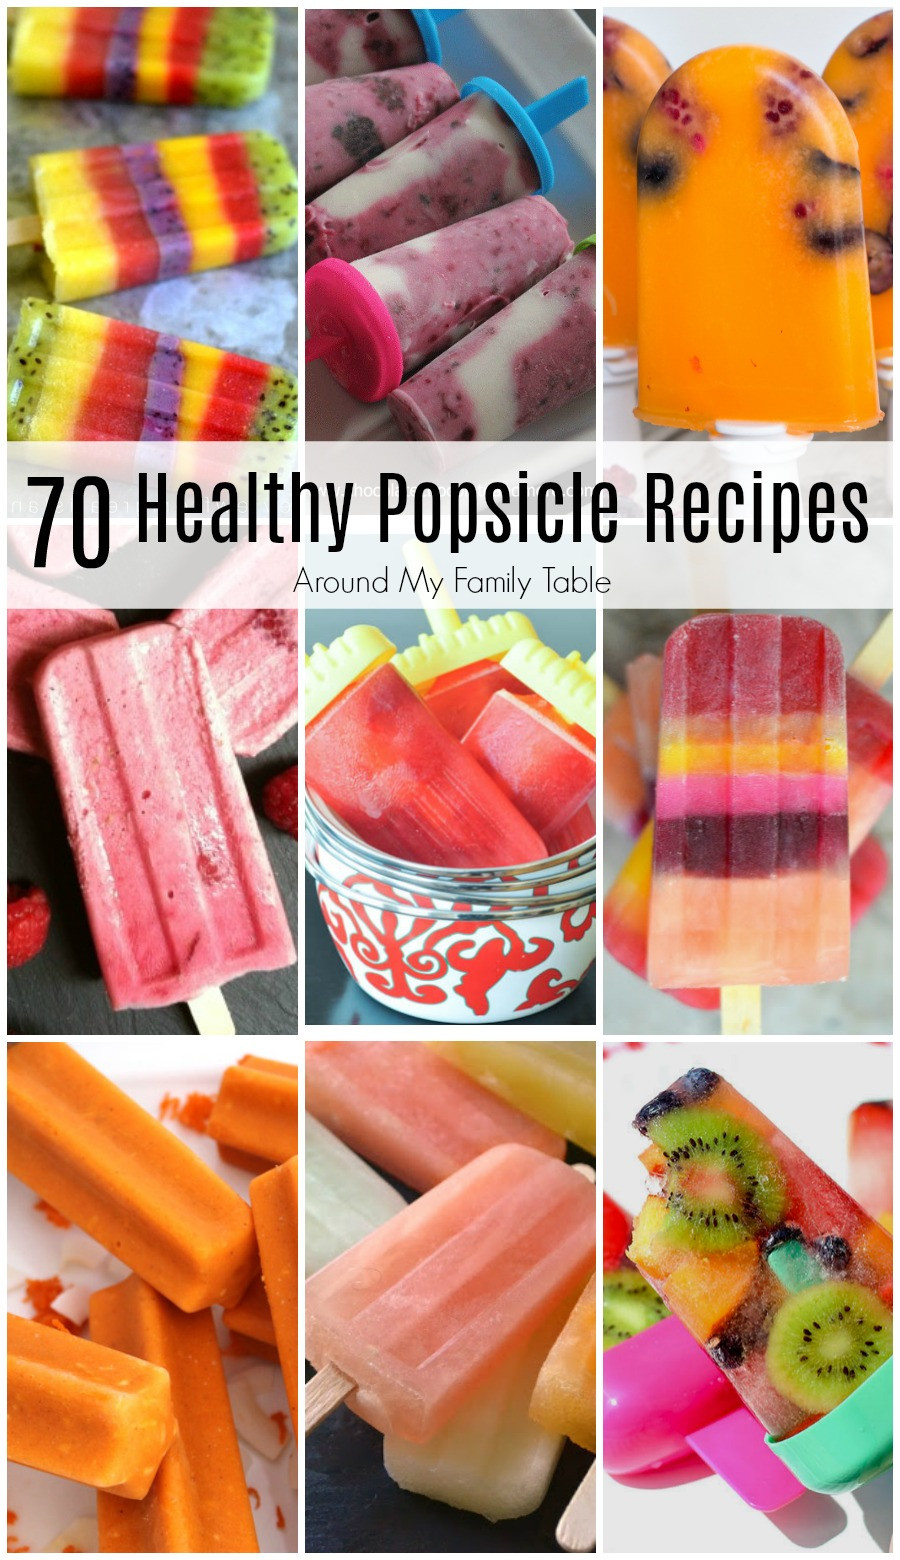 Popsicle Recipes For Kids
 70 Healthy Popsicle Recipes Around My Family Table